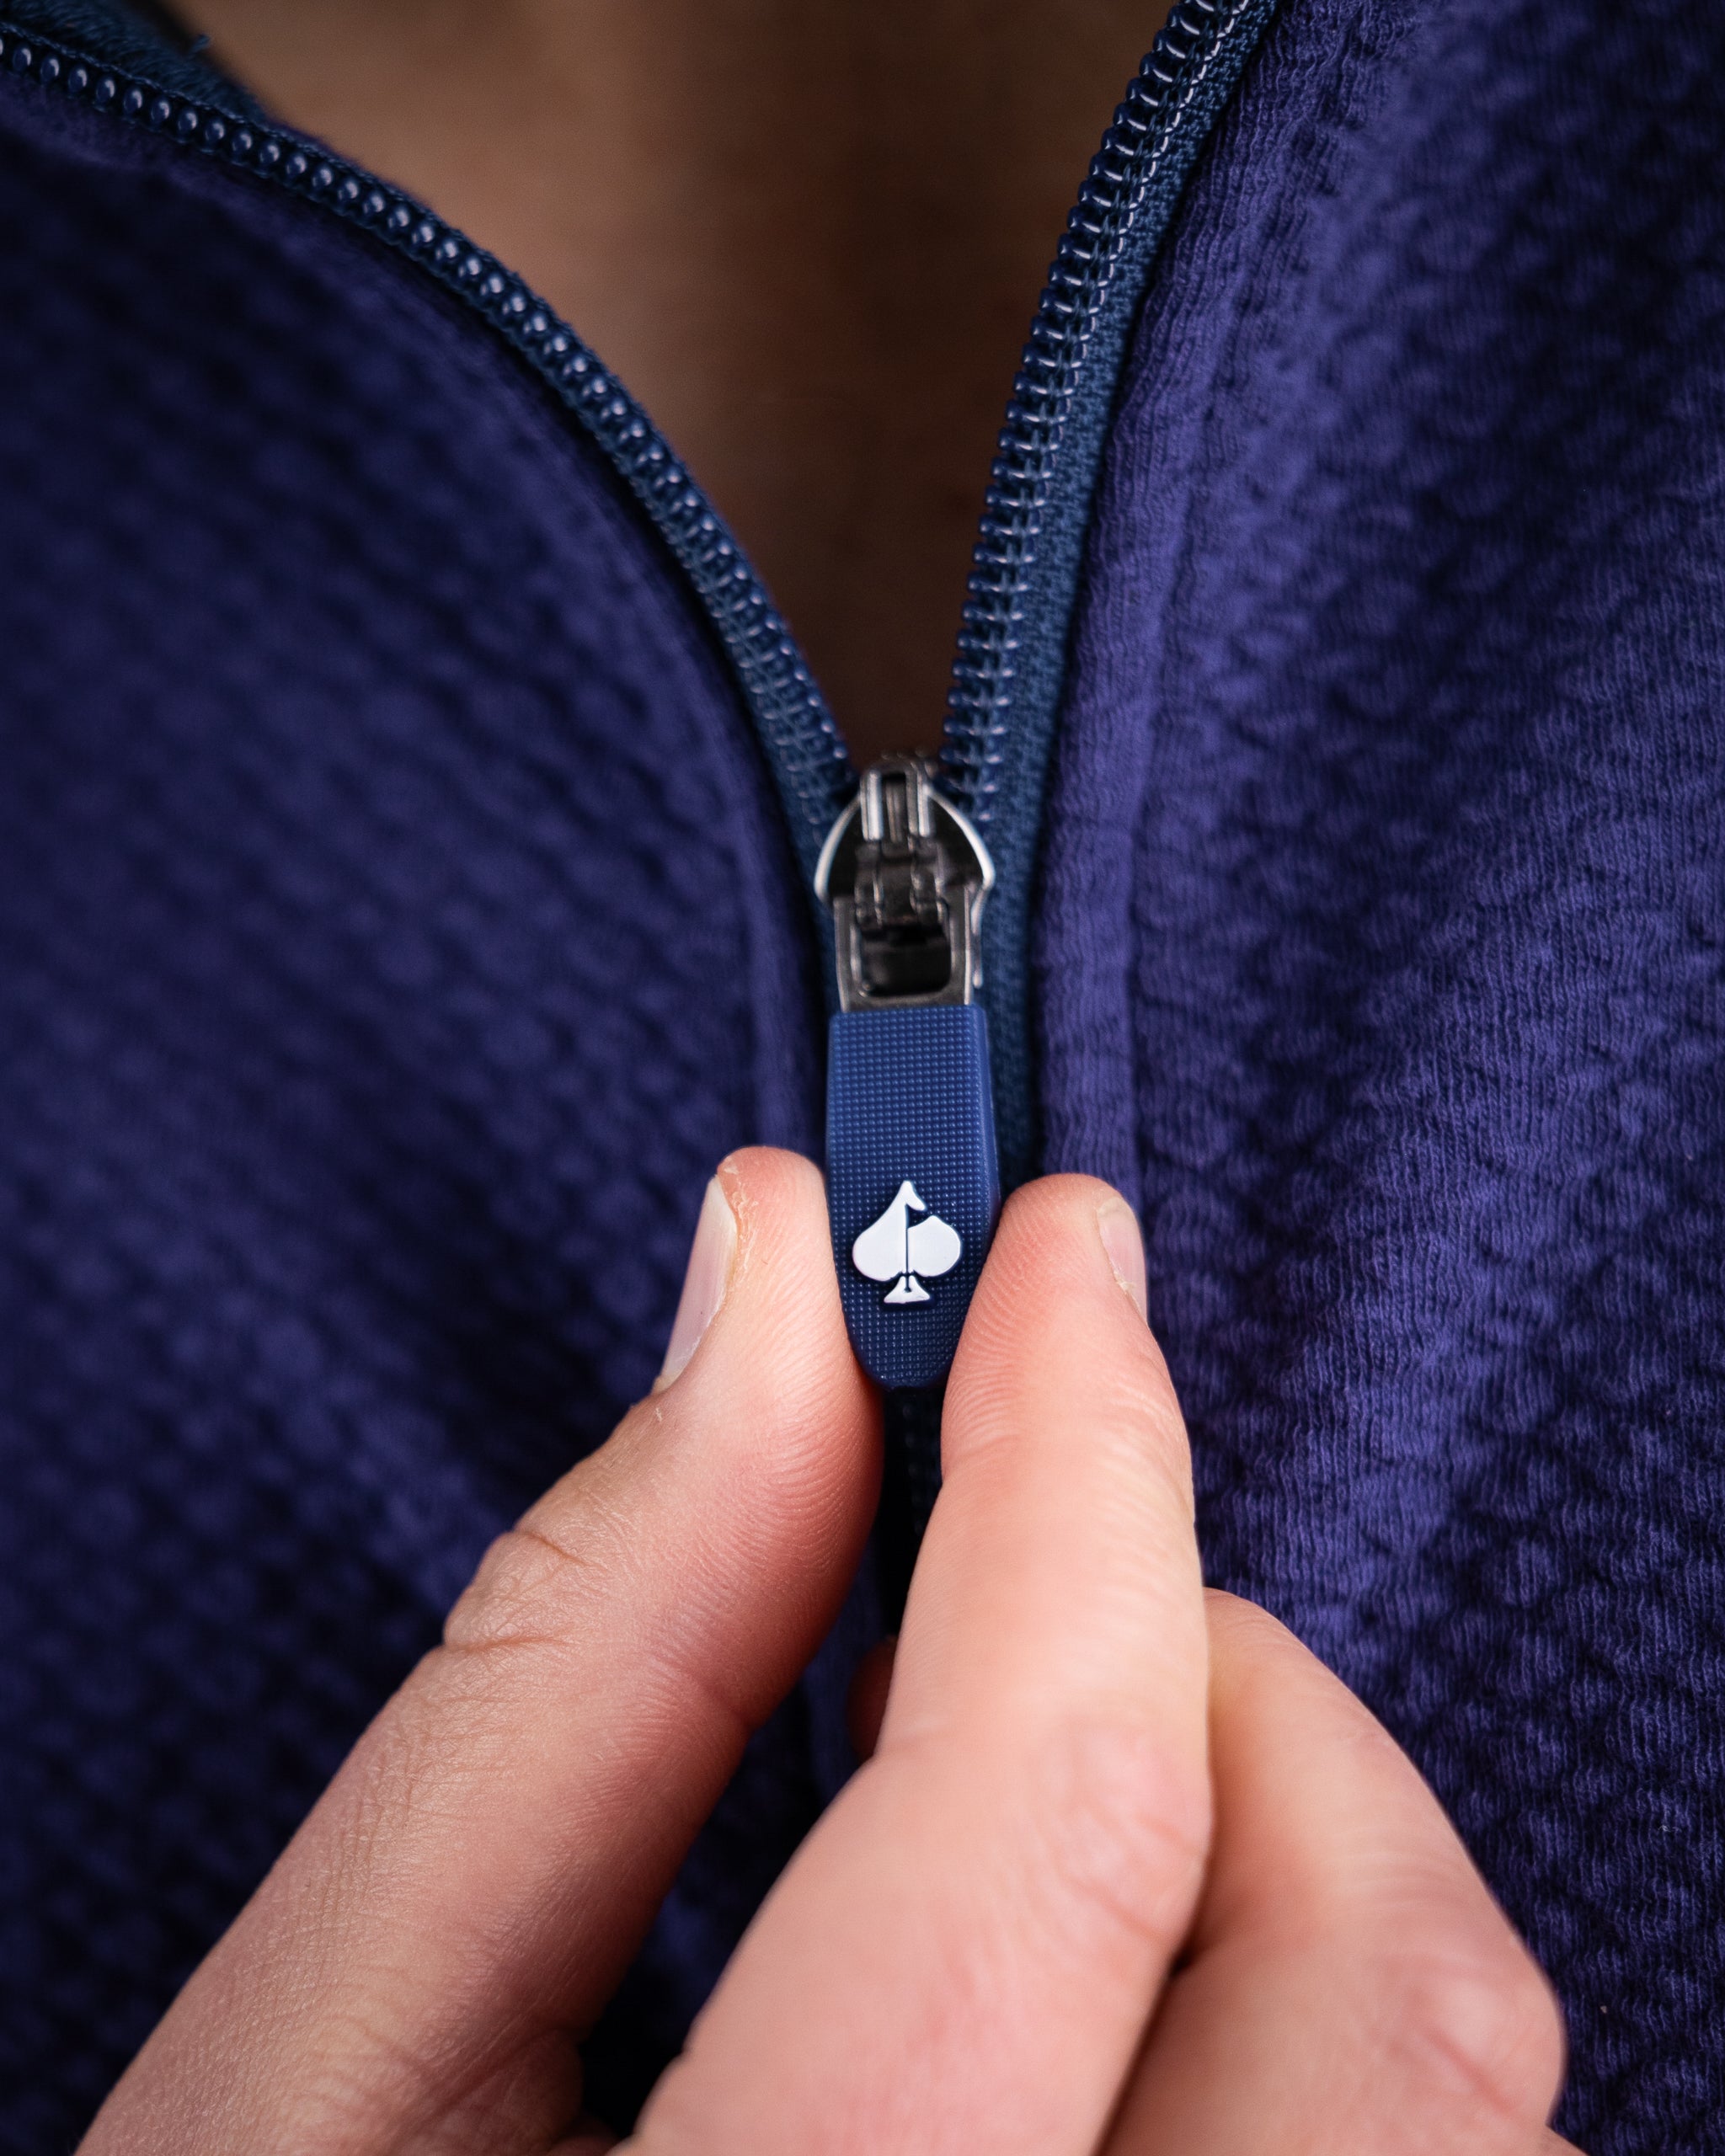 Player Preferred™ Waffle Knit Pullover - Navy